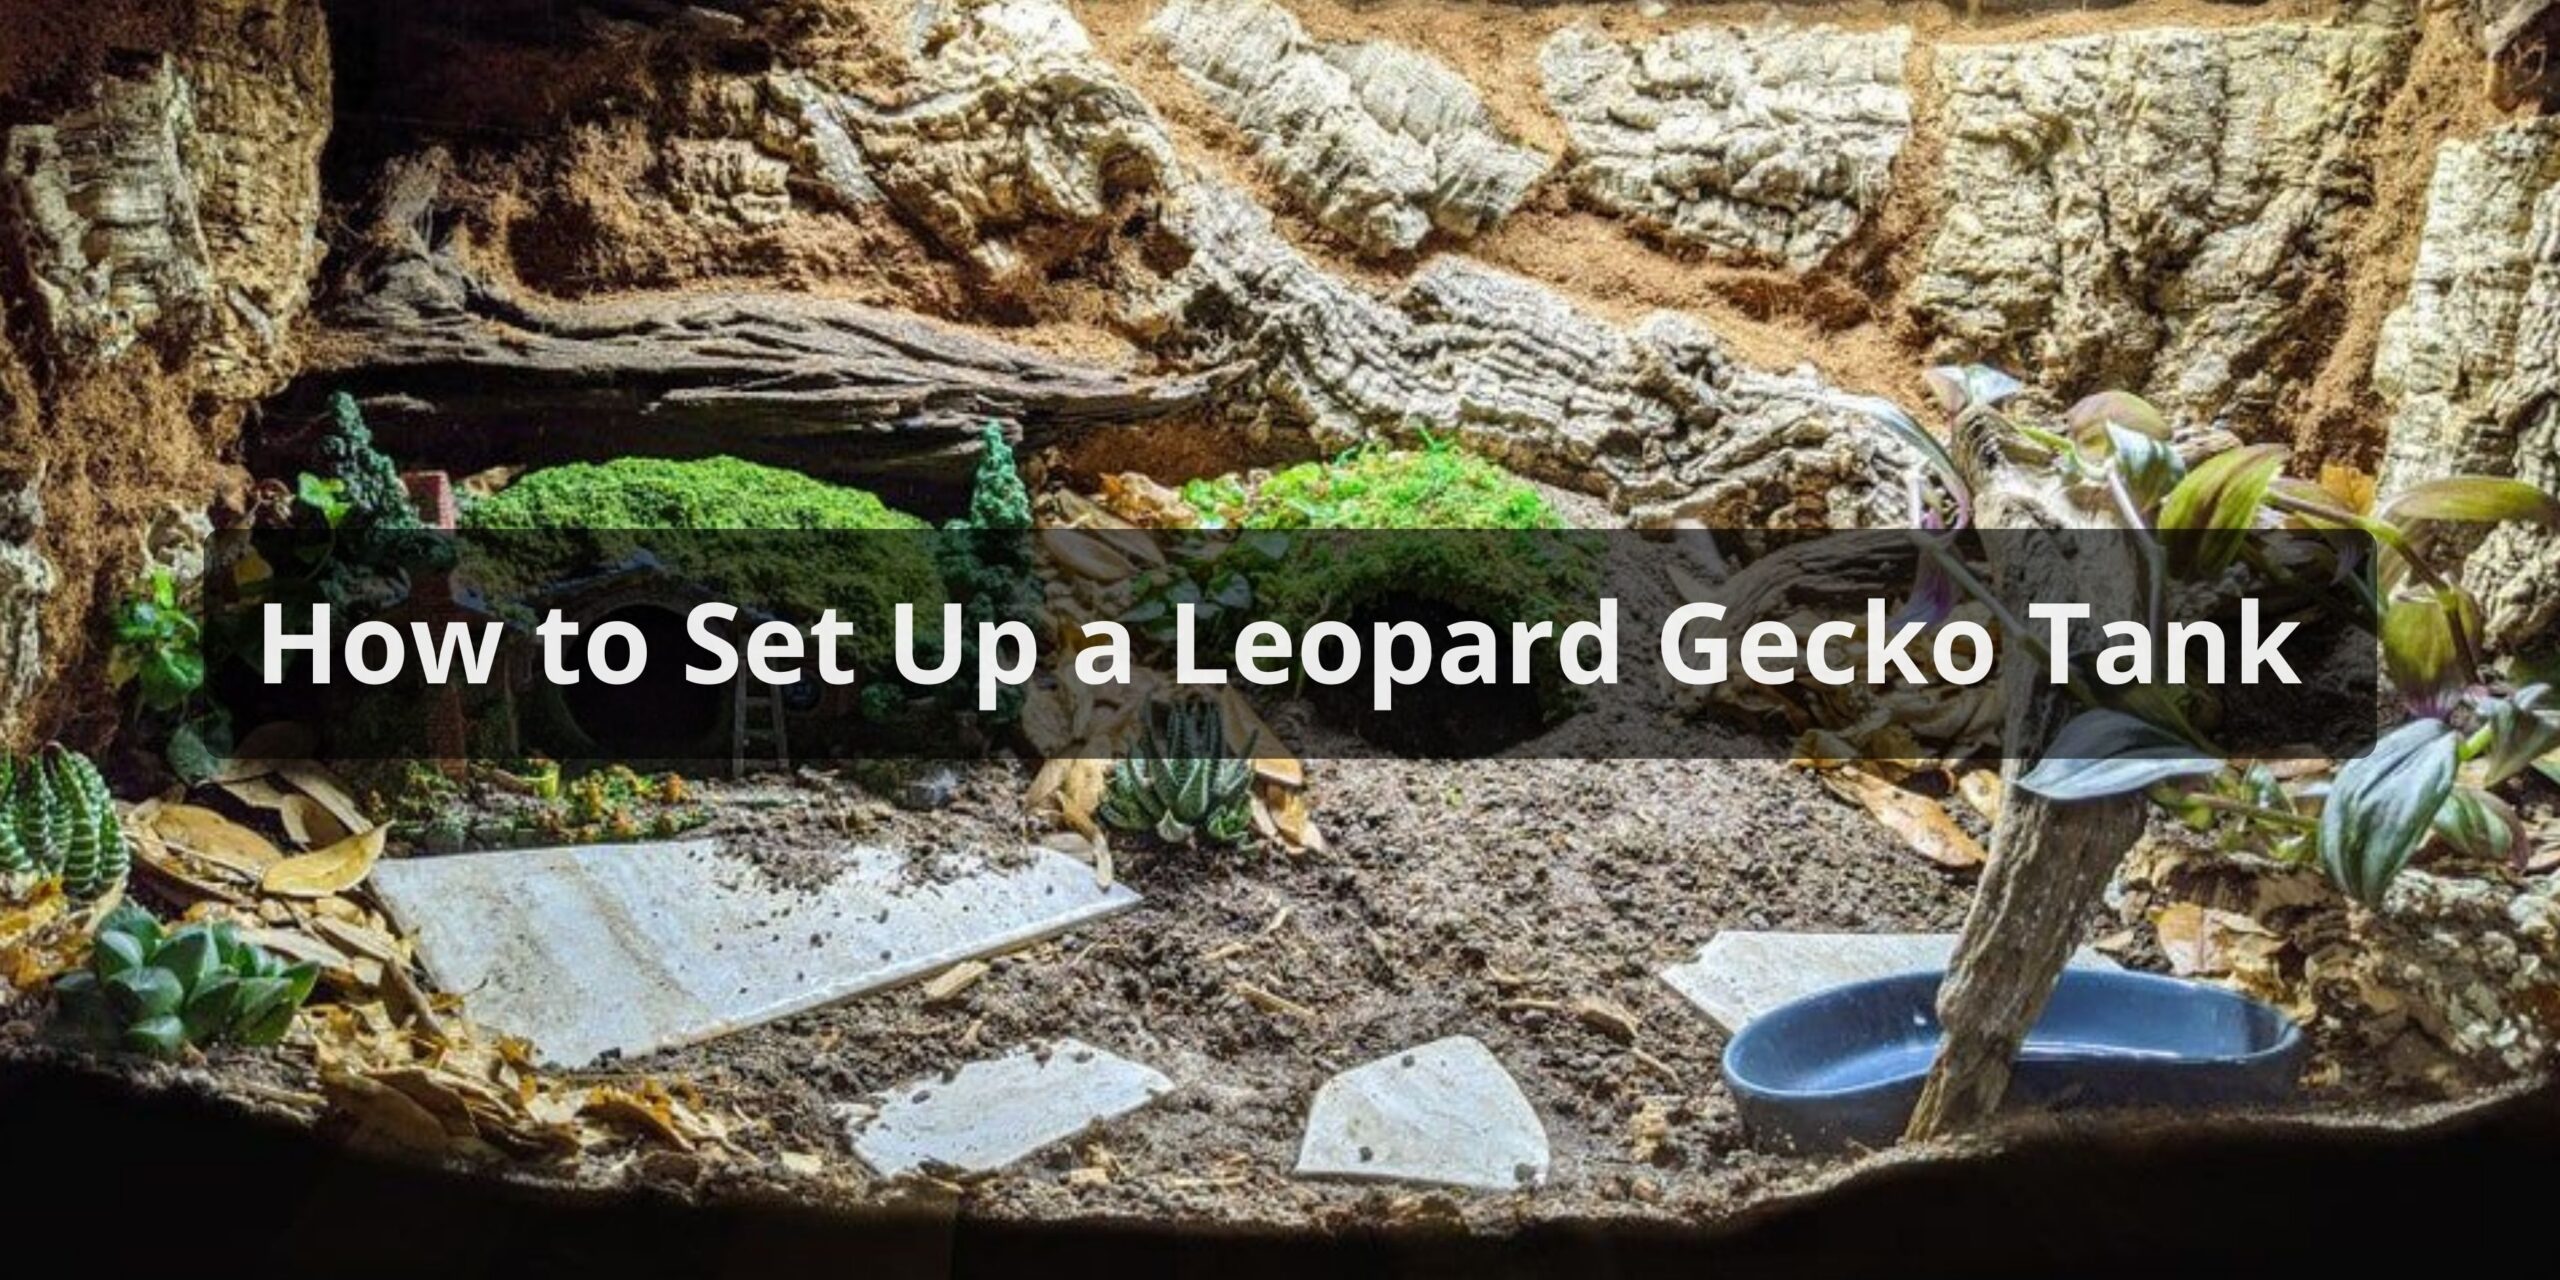 How to Set Up a Leopard Gecko Tank